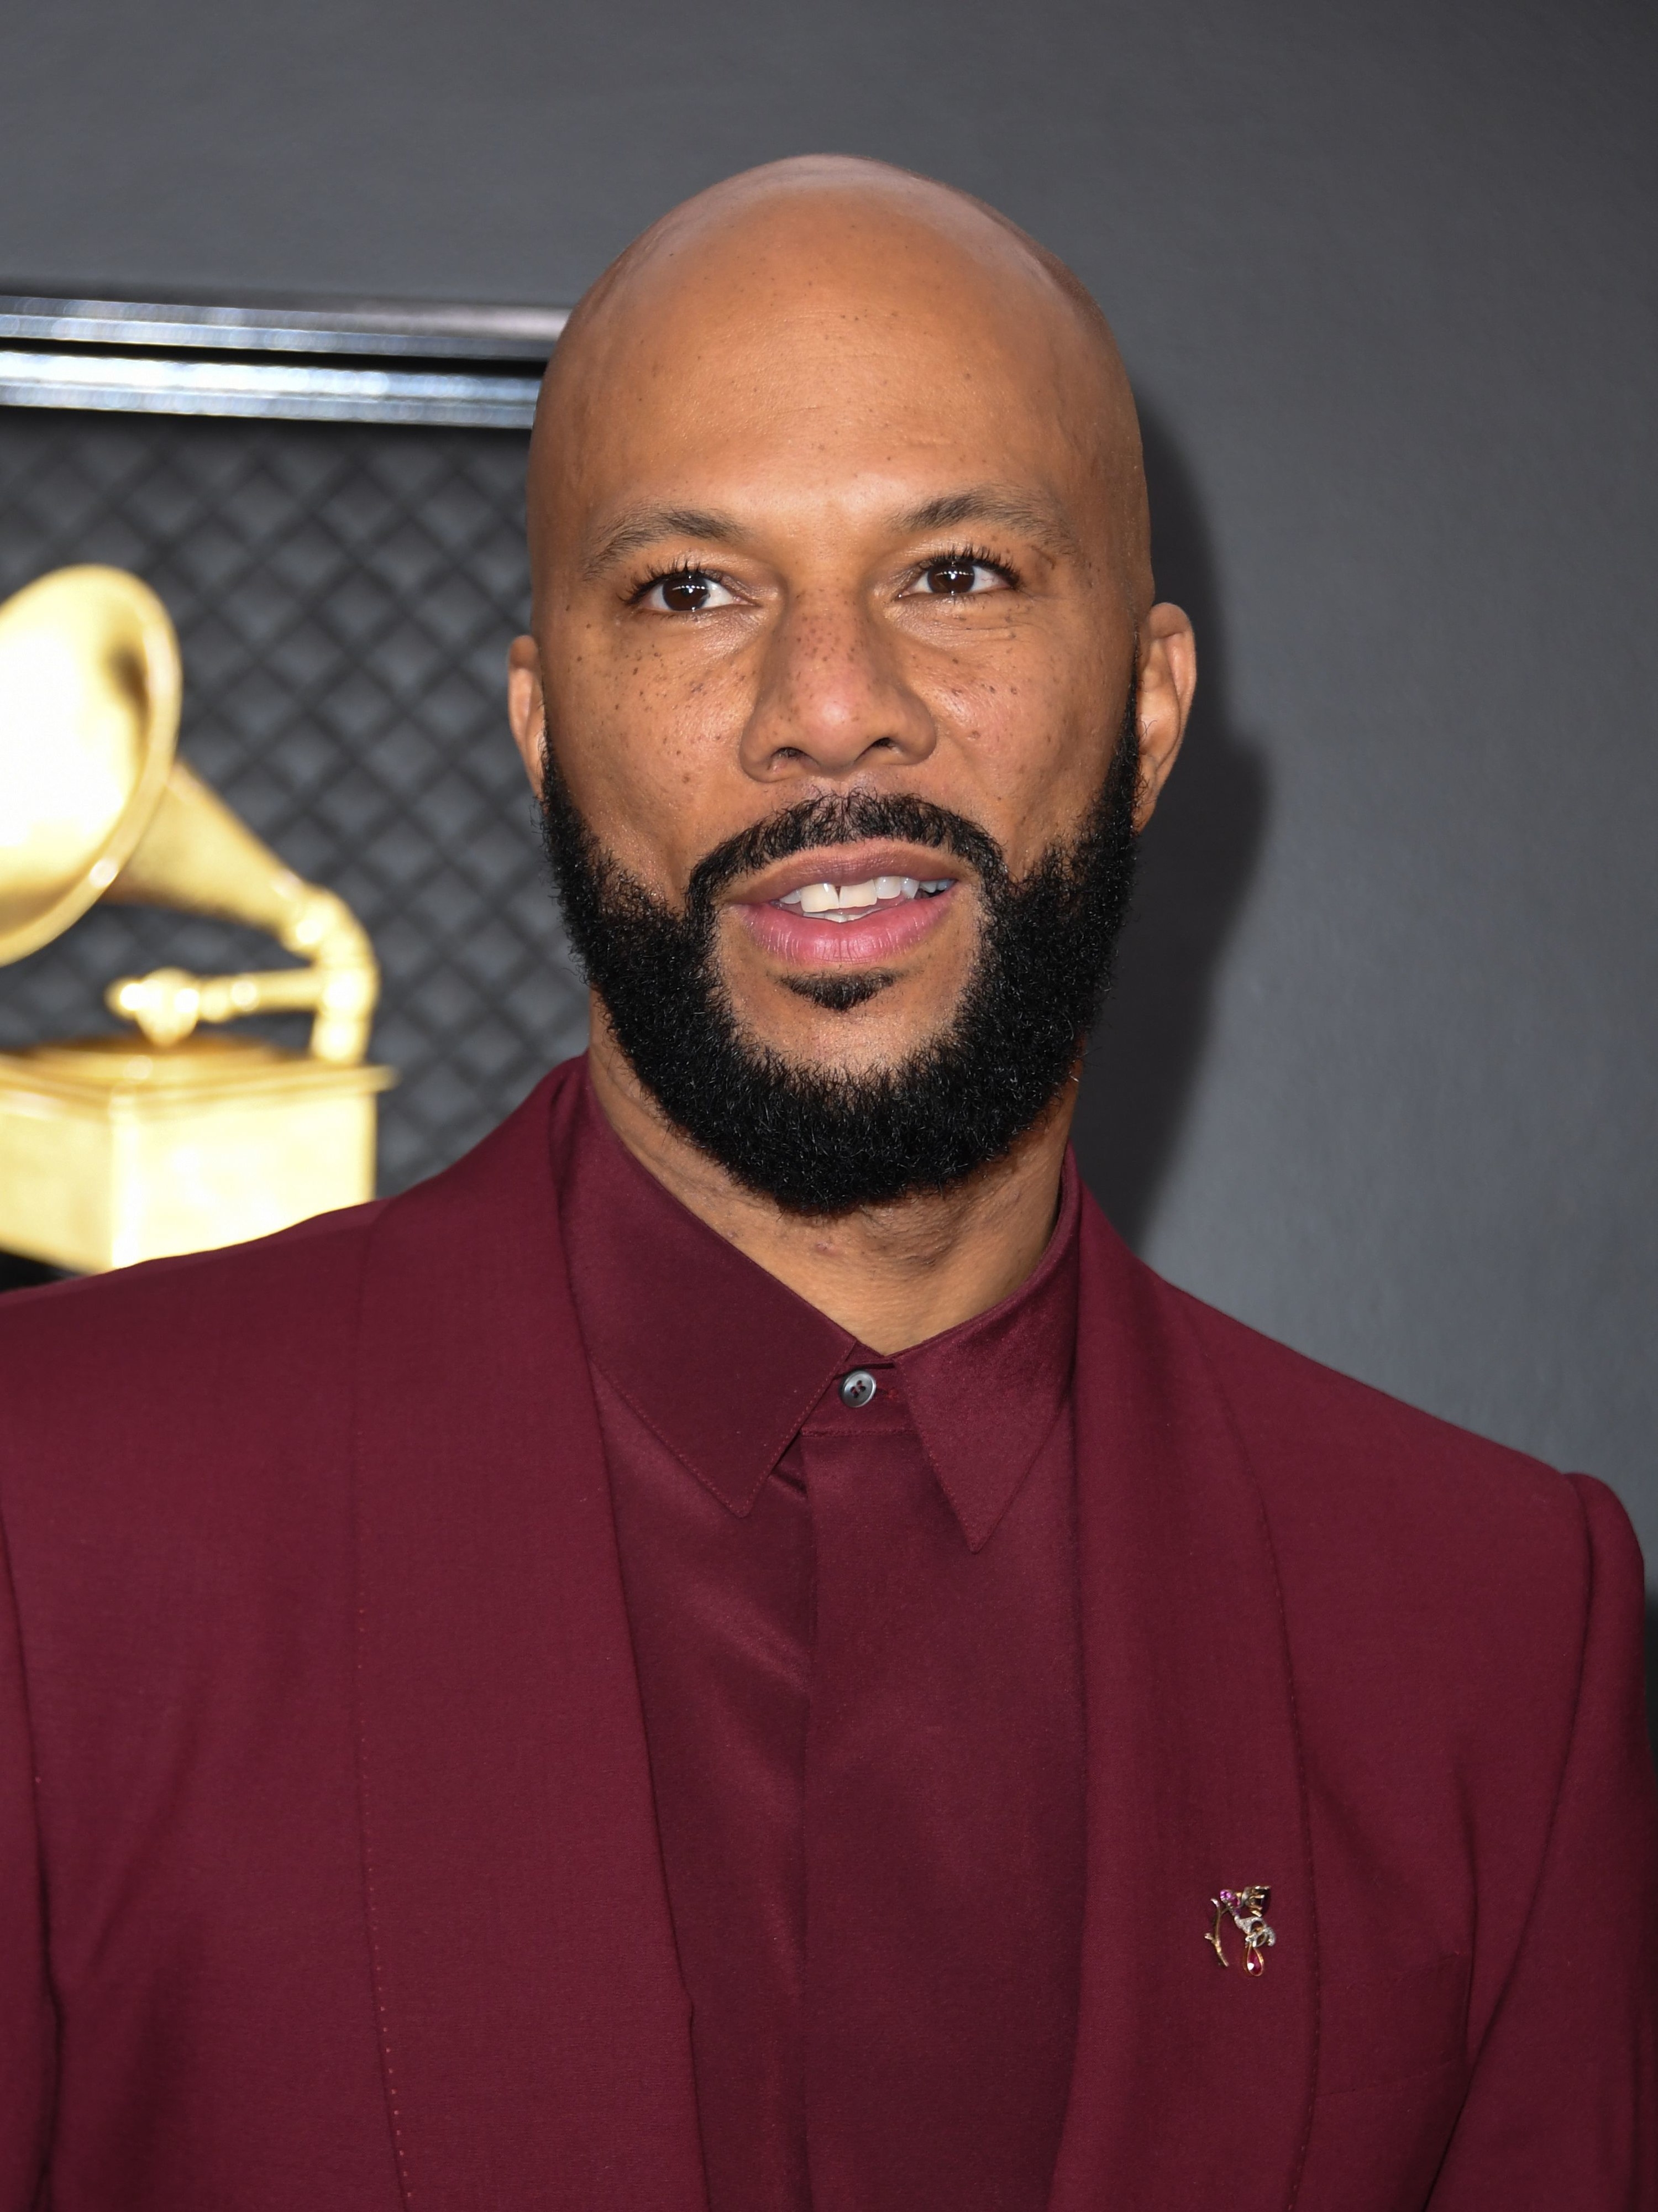 Close-up of Common with a beard and mustache and wearing a matching shirt and jacket